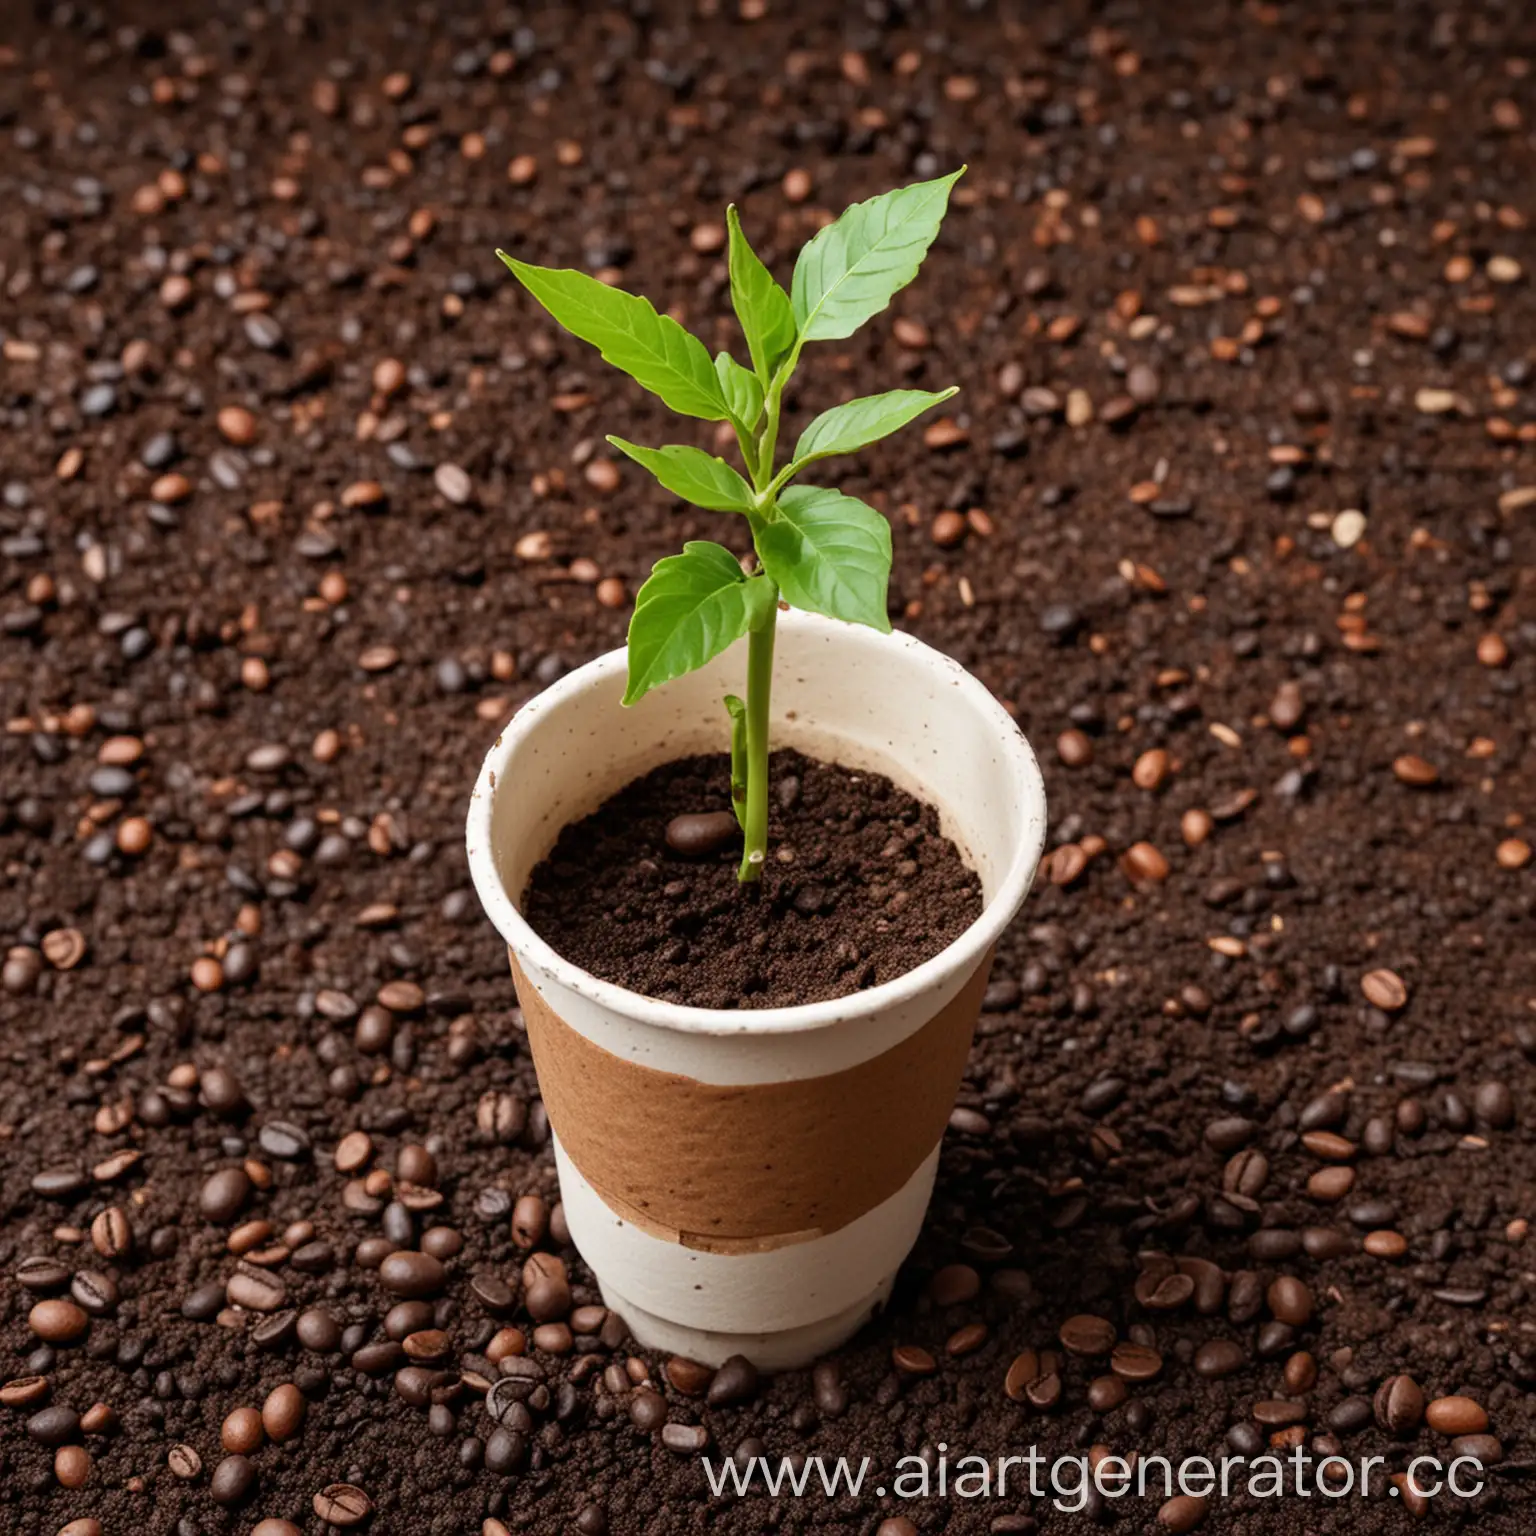 Biodegradable-SingleUse-Coffee-Cup-with-Plant-Seeds-for-EcoFriendly-Gardening